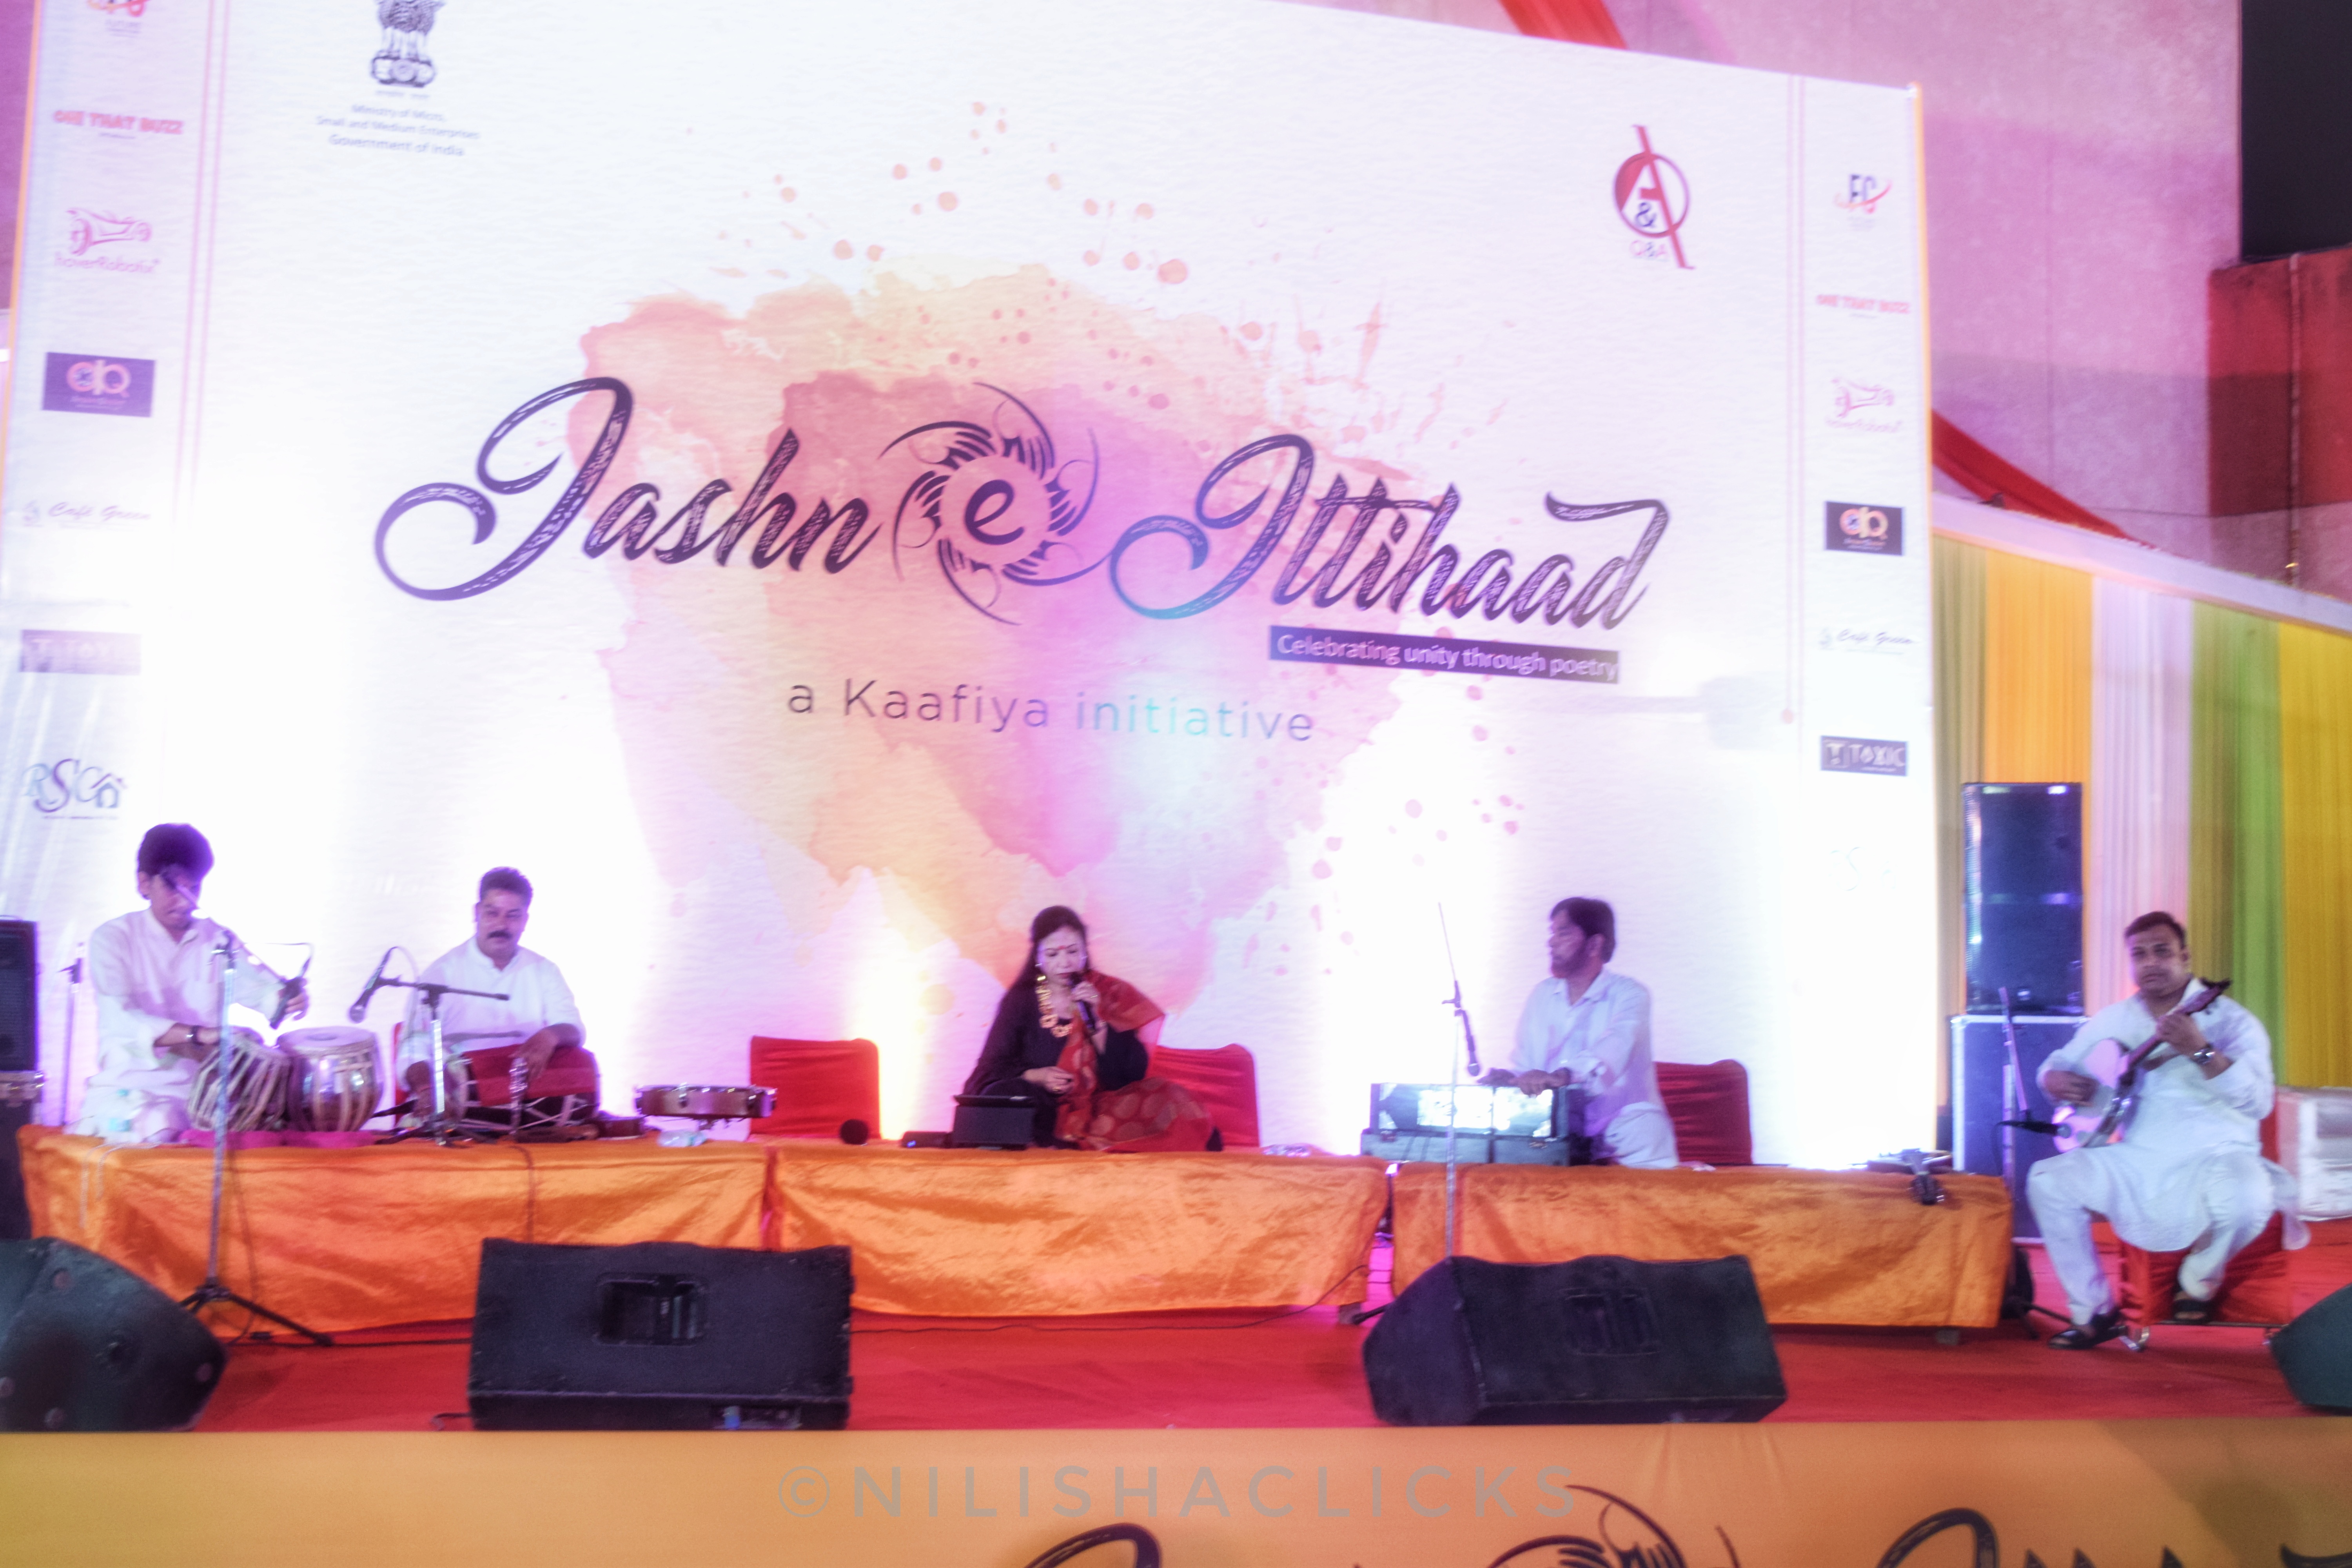 Jashn-e-Ittihaad -India’s First Poetry & Musical Event To Spread Peace